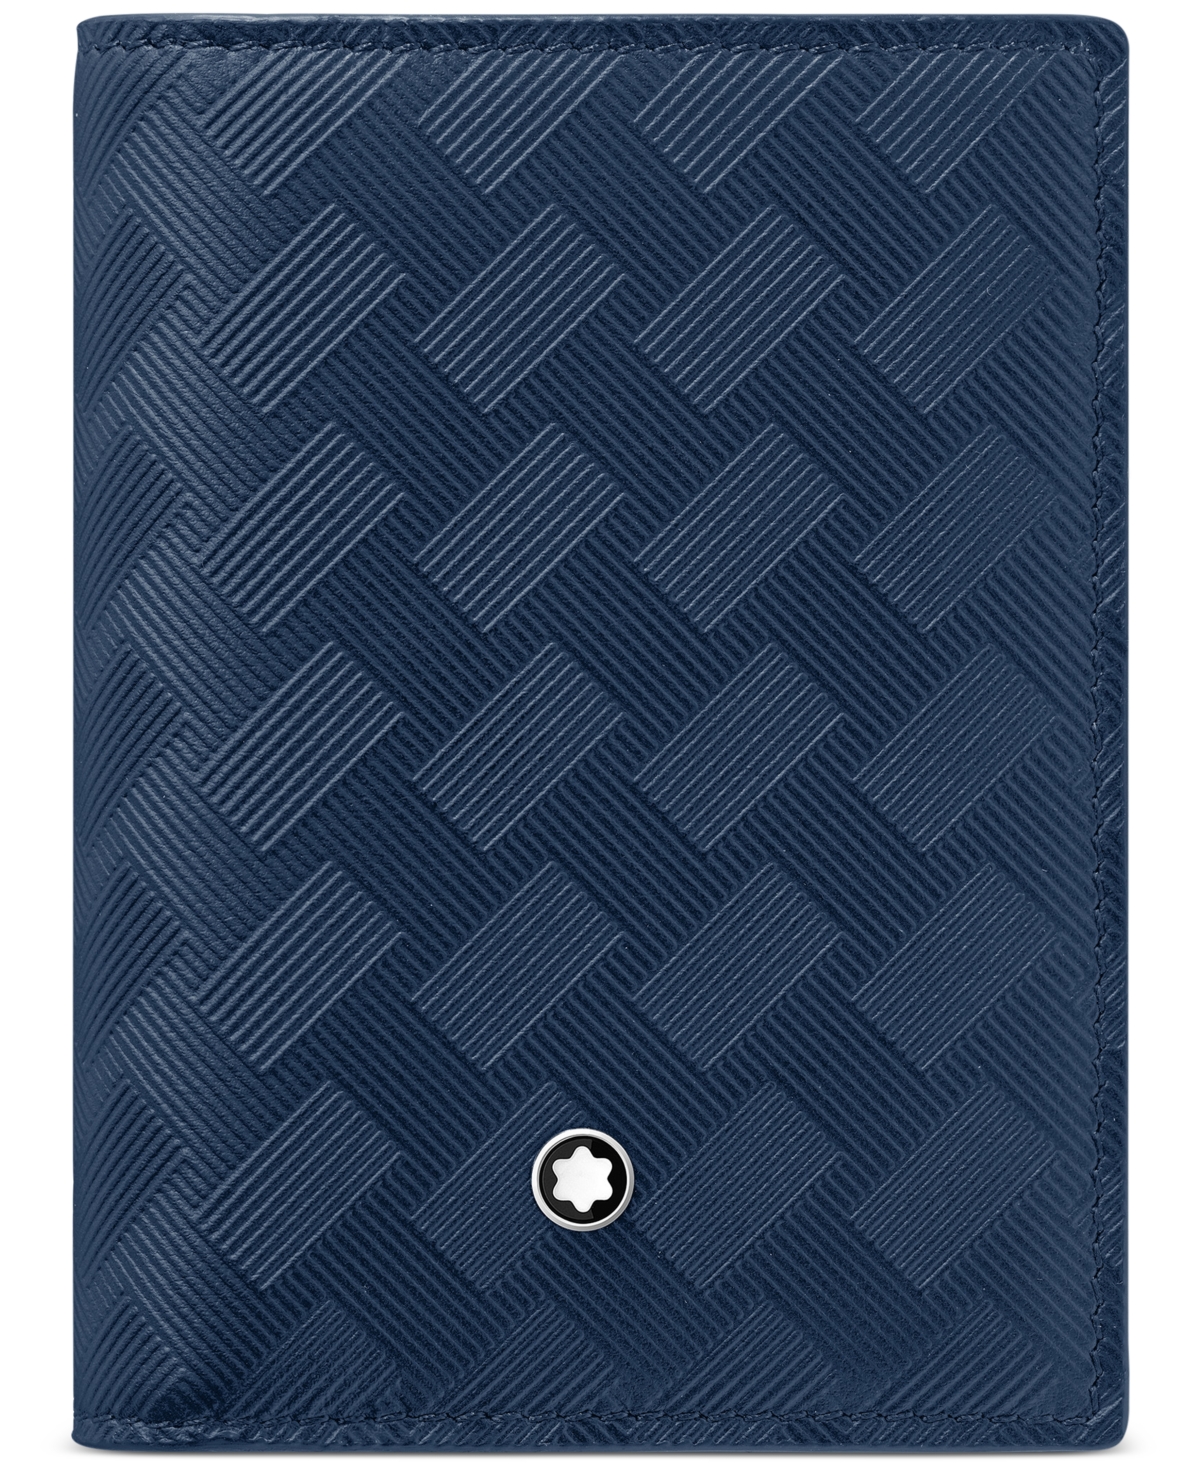 Extreme 3.0 Leather Card Holder - Blue